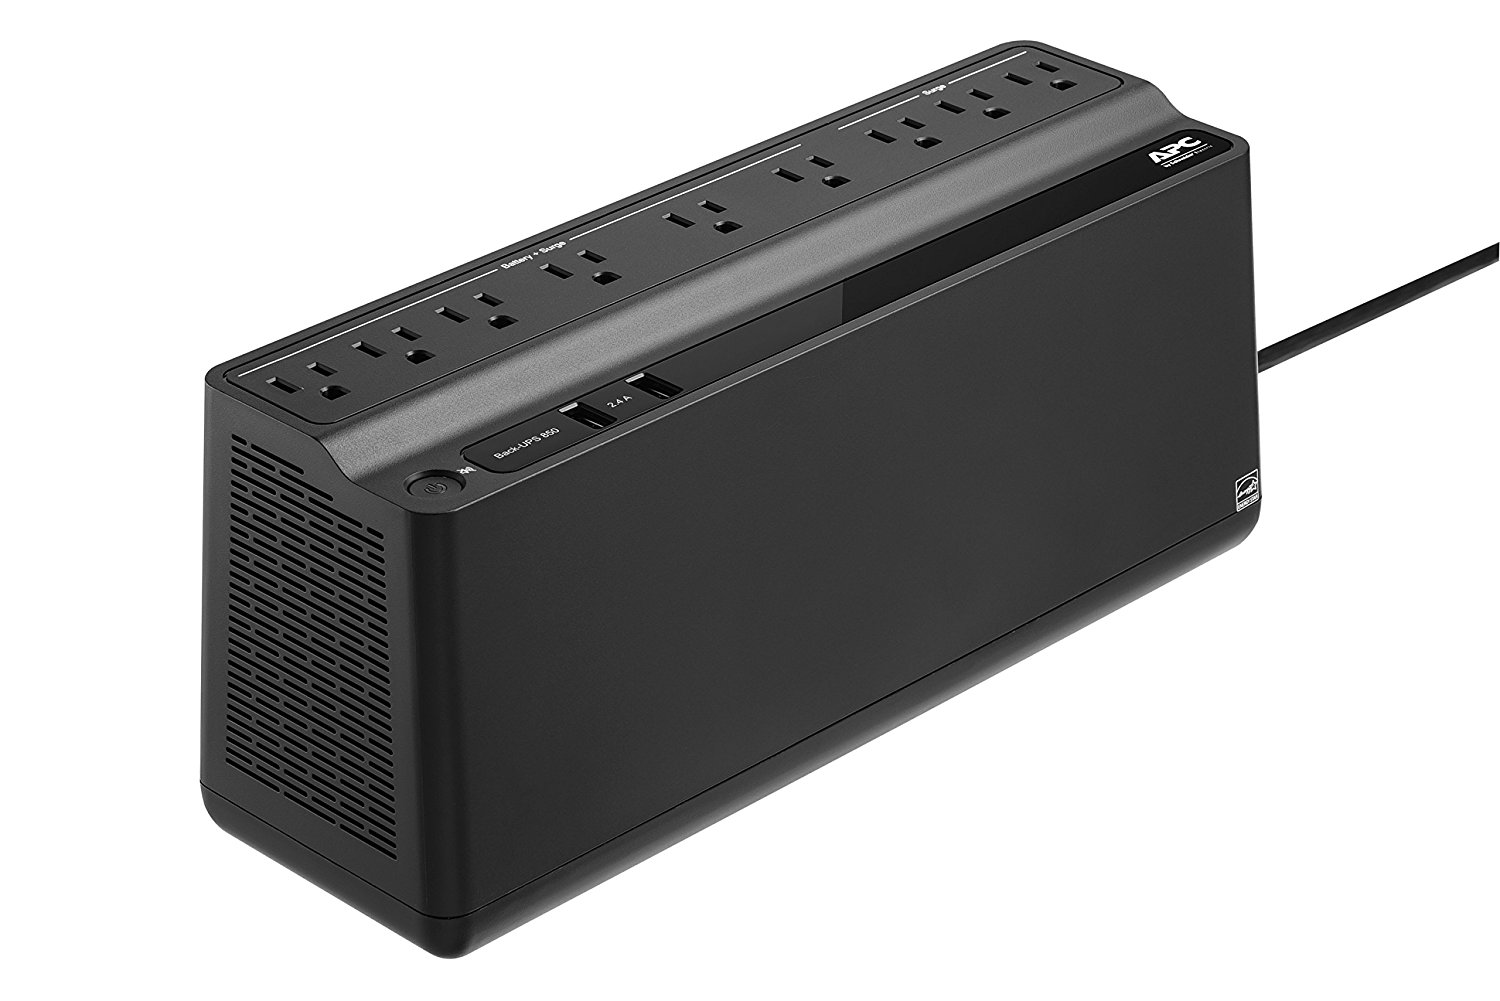 Save on APC Back-UPS Battery Backup & Surge Protector with USB Charging Ports – Just $72.99!